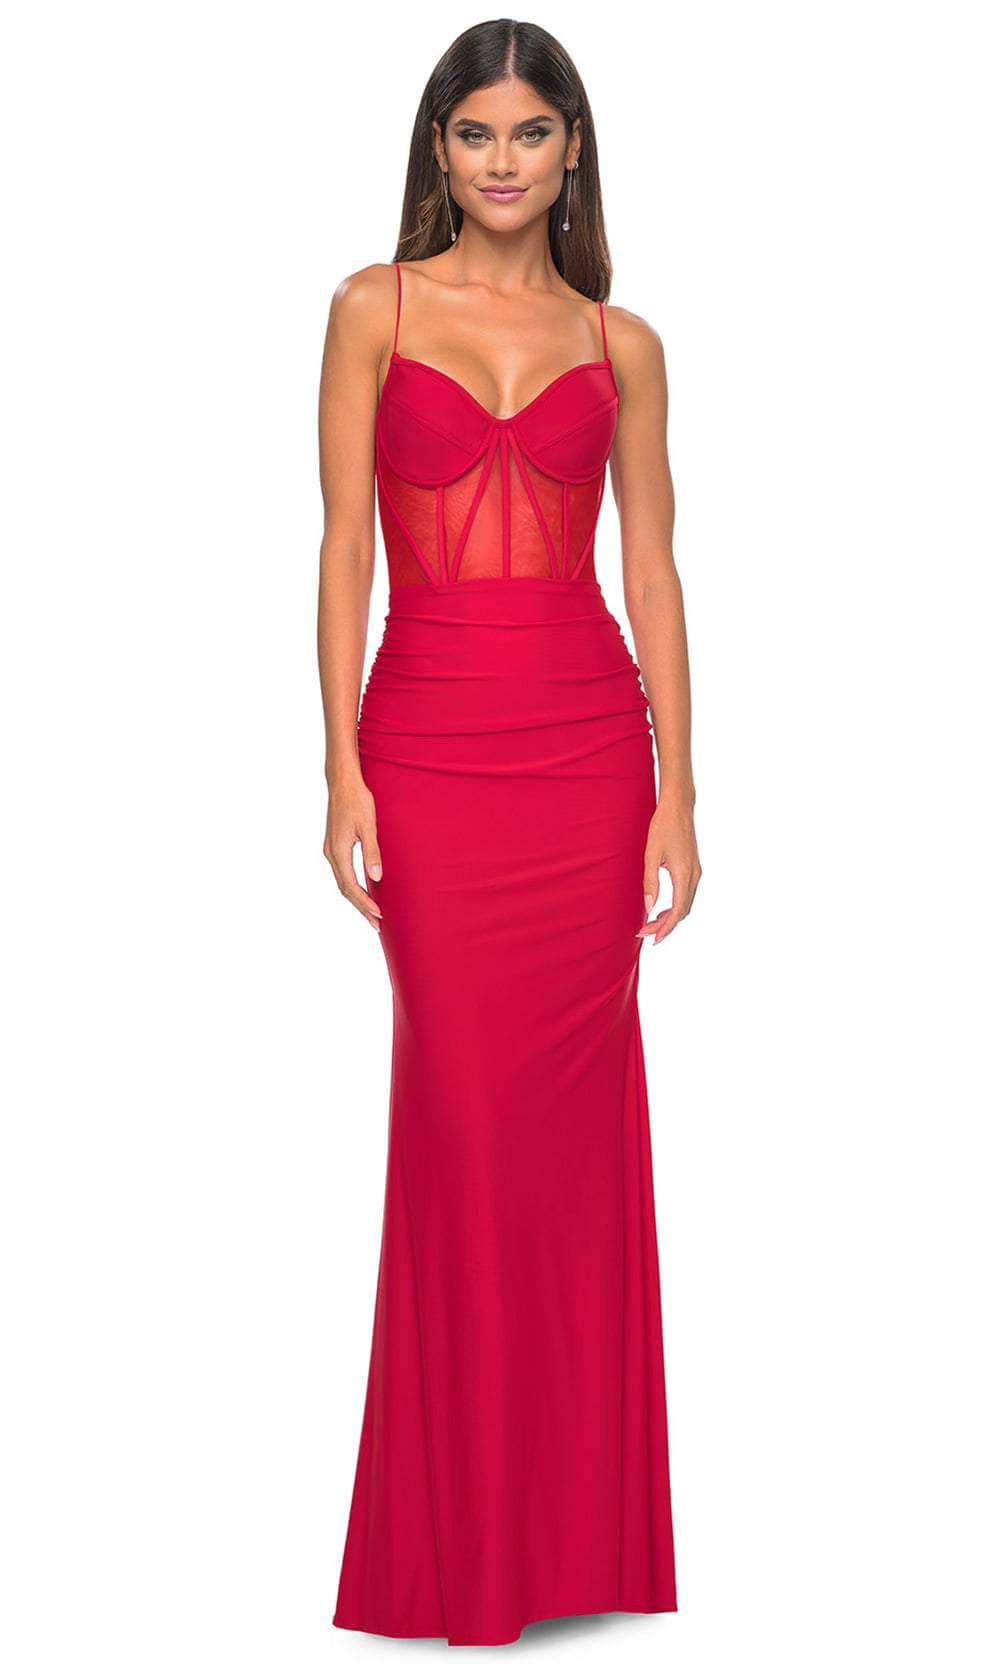 La Femme 32258 - Spaghetti Strap Fitted Prom Gown Evening Dresses 00 /  Red